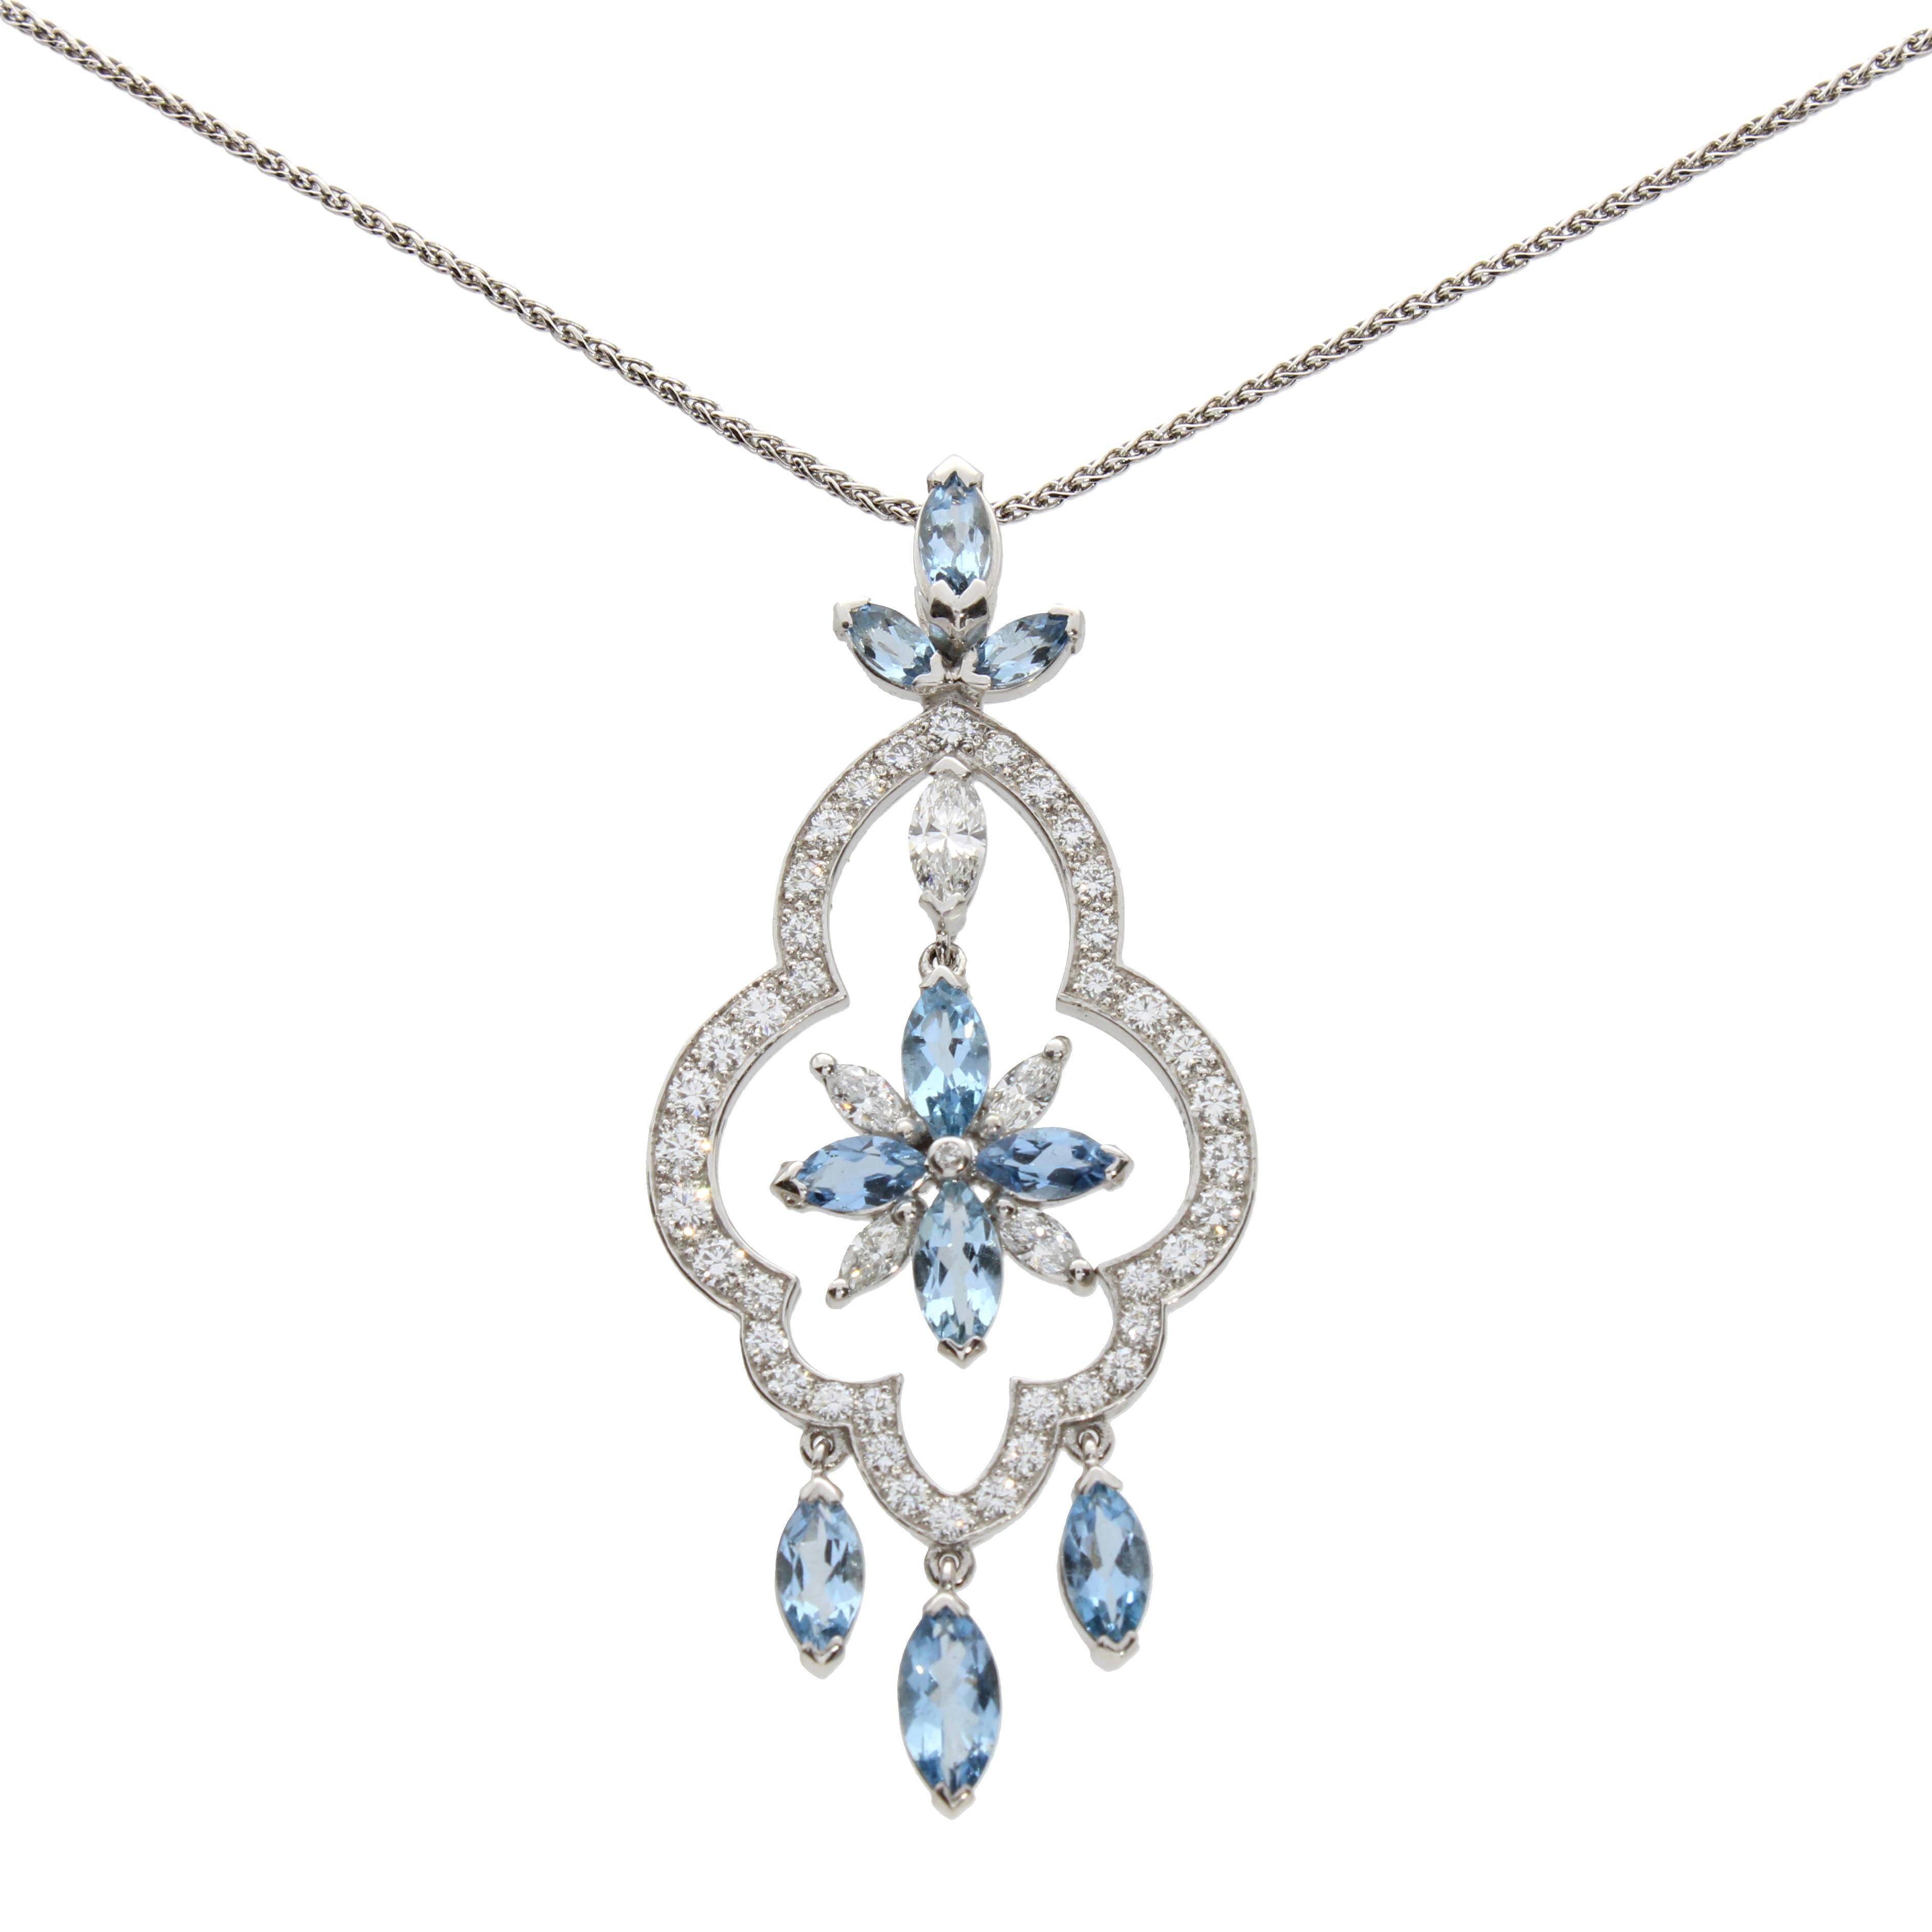 The delicate beauty of a flower, depicted in elegant marquise aquamarines and diamonds exquisitely suspended within a glittering frame of brilliant cut diamonds with marquise cut dew drops.

Details
Stella Aquamarine and Diamonds Pendant
- 18 karat